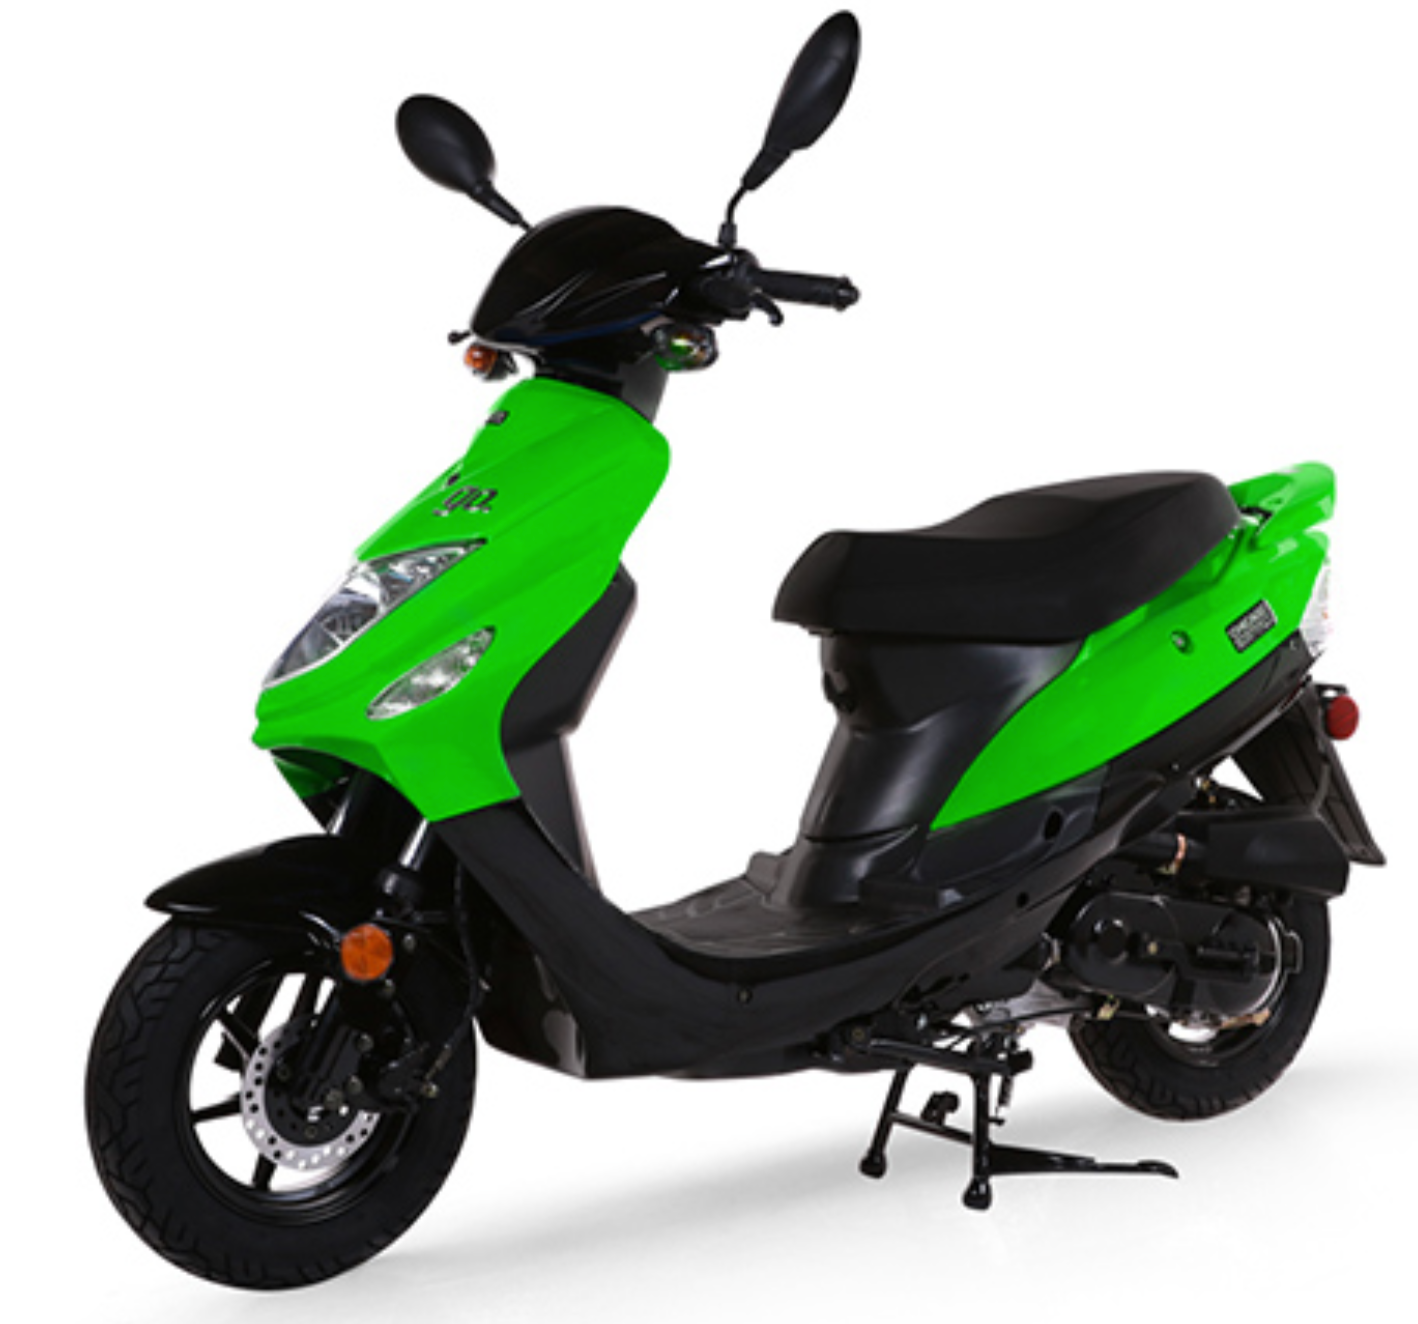 Top 10 50cc Scooters 2019! Some of the best scooters for beginners! 